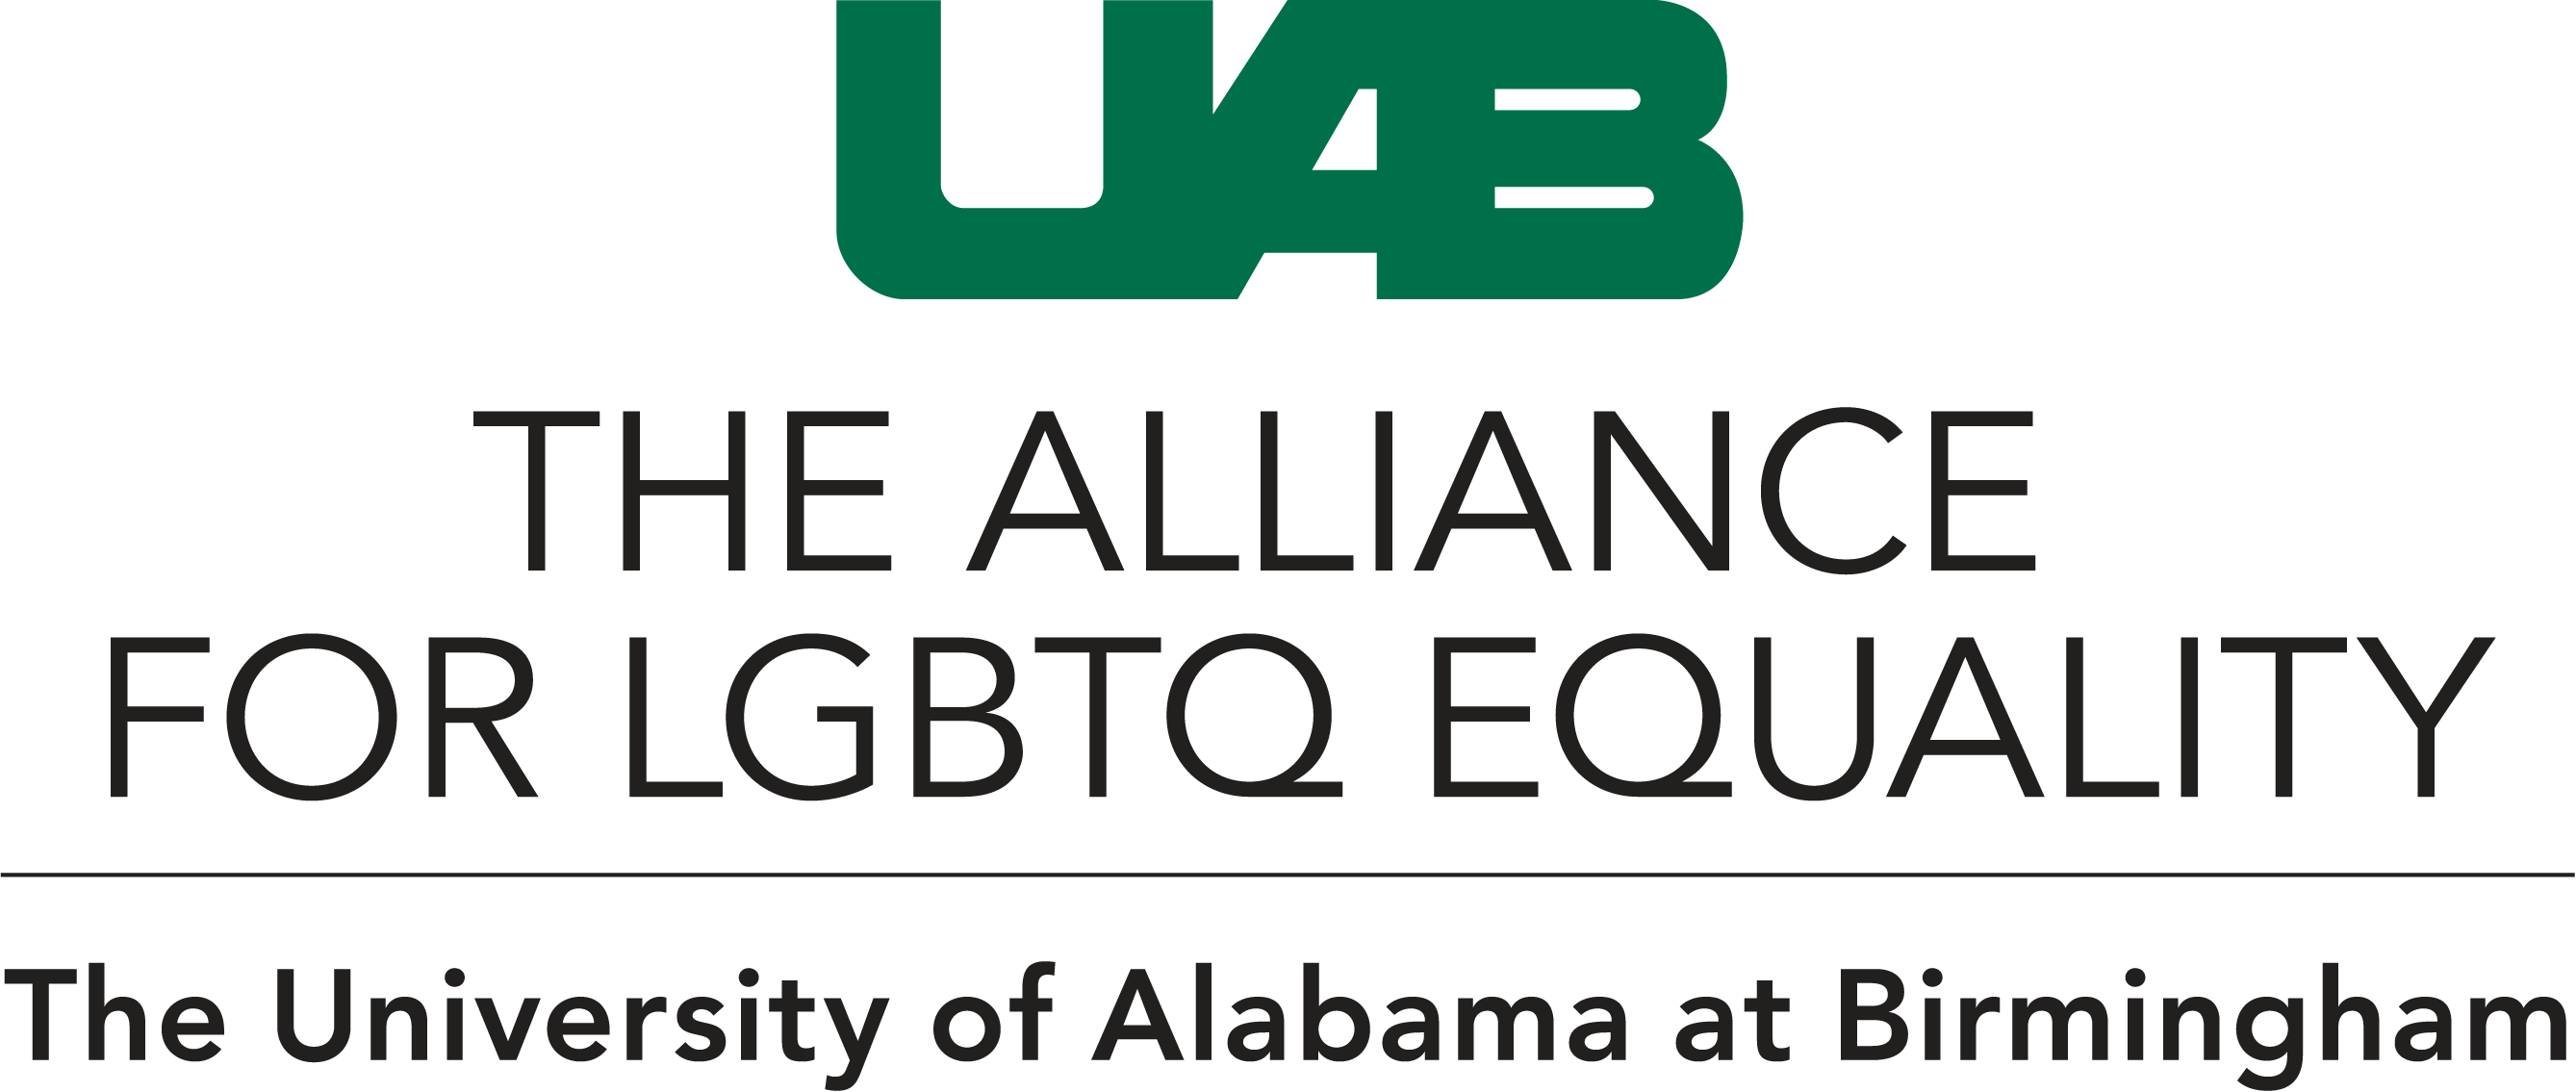 Alliance for LGBT Equality at UAB logo